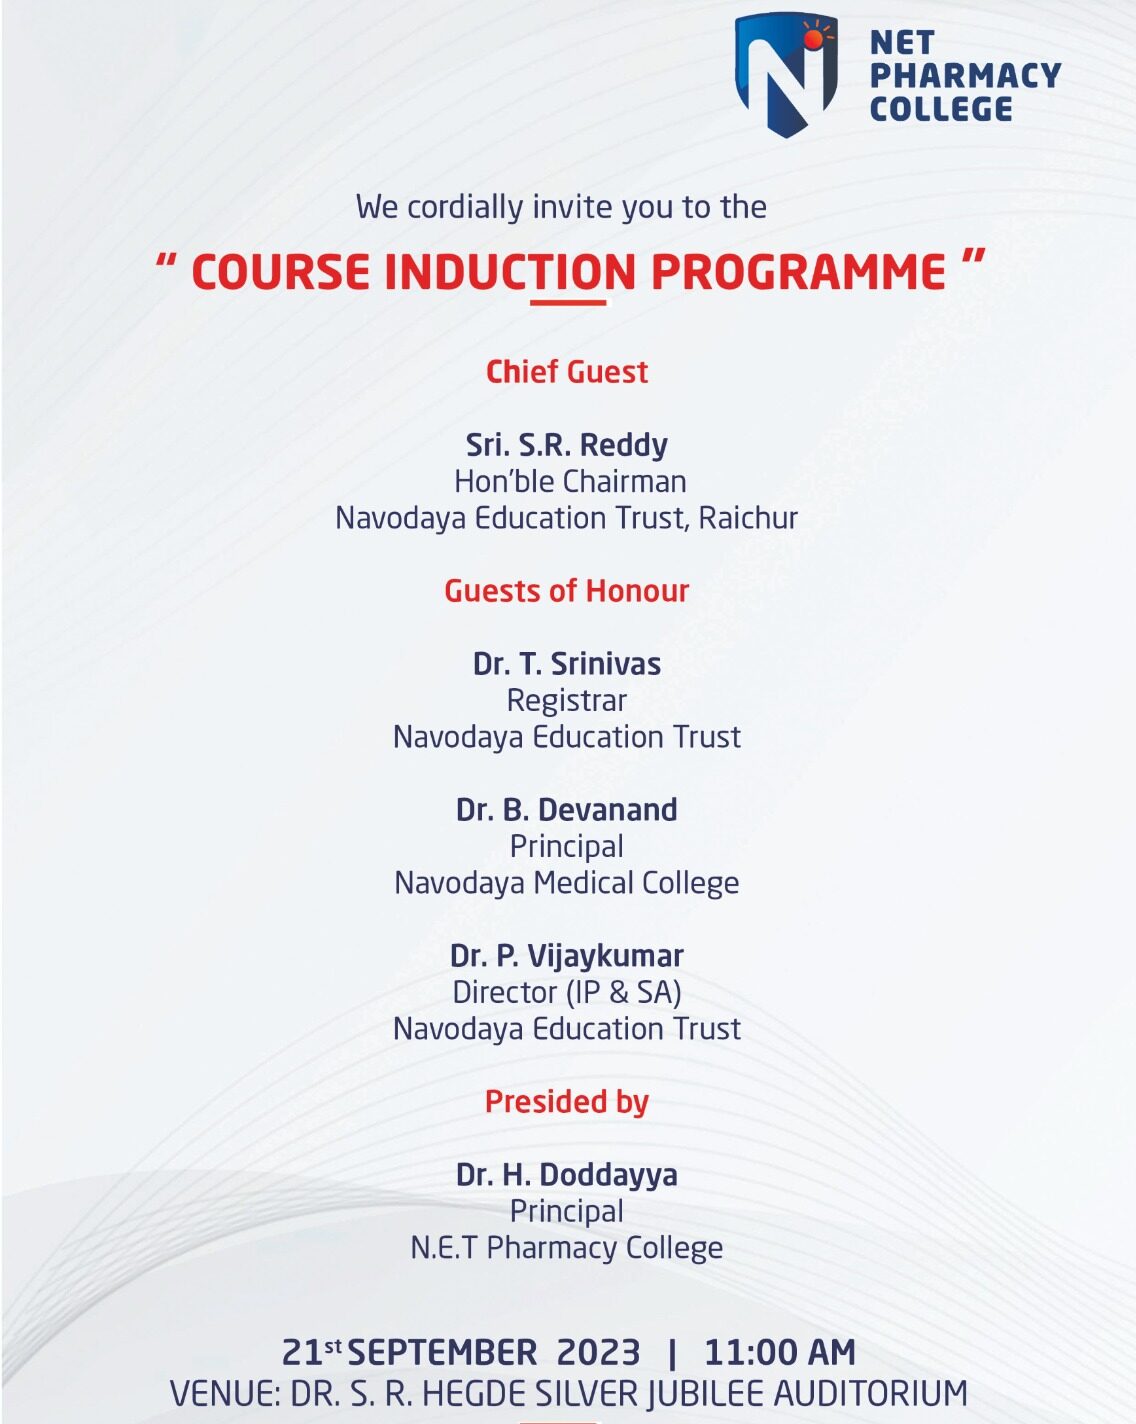 Course Induction Programme, Organized by NET Pharmacy College